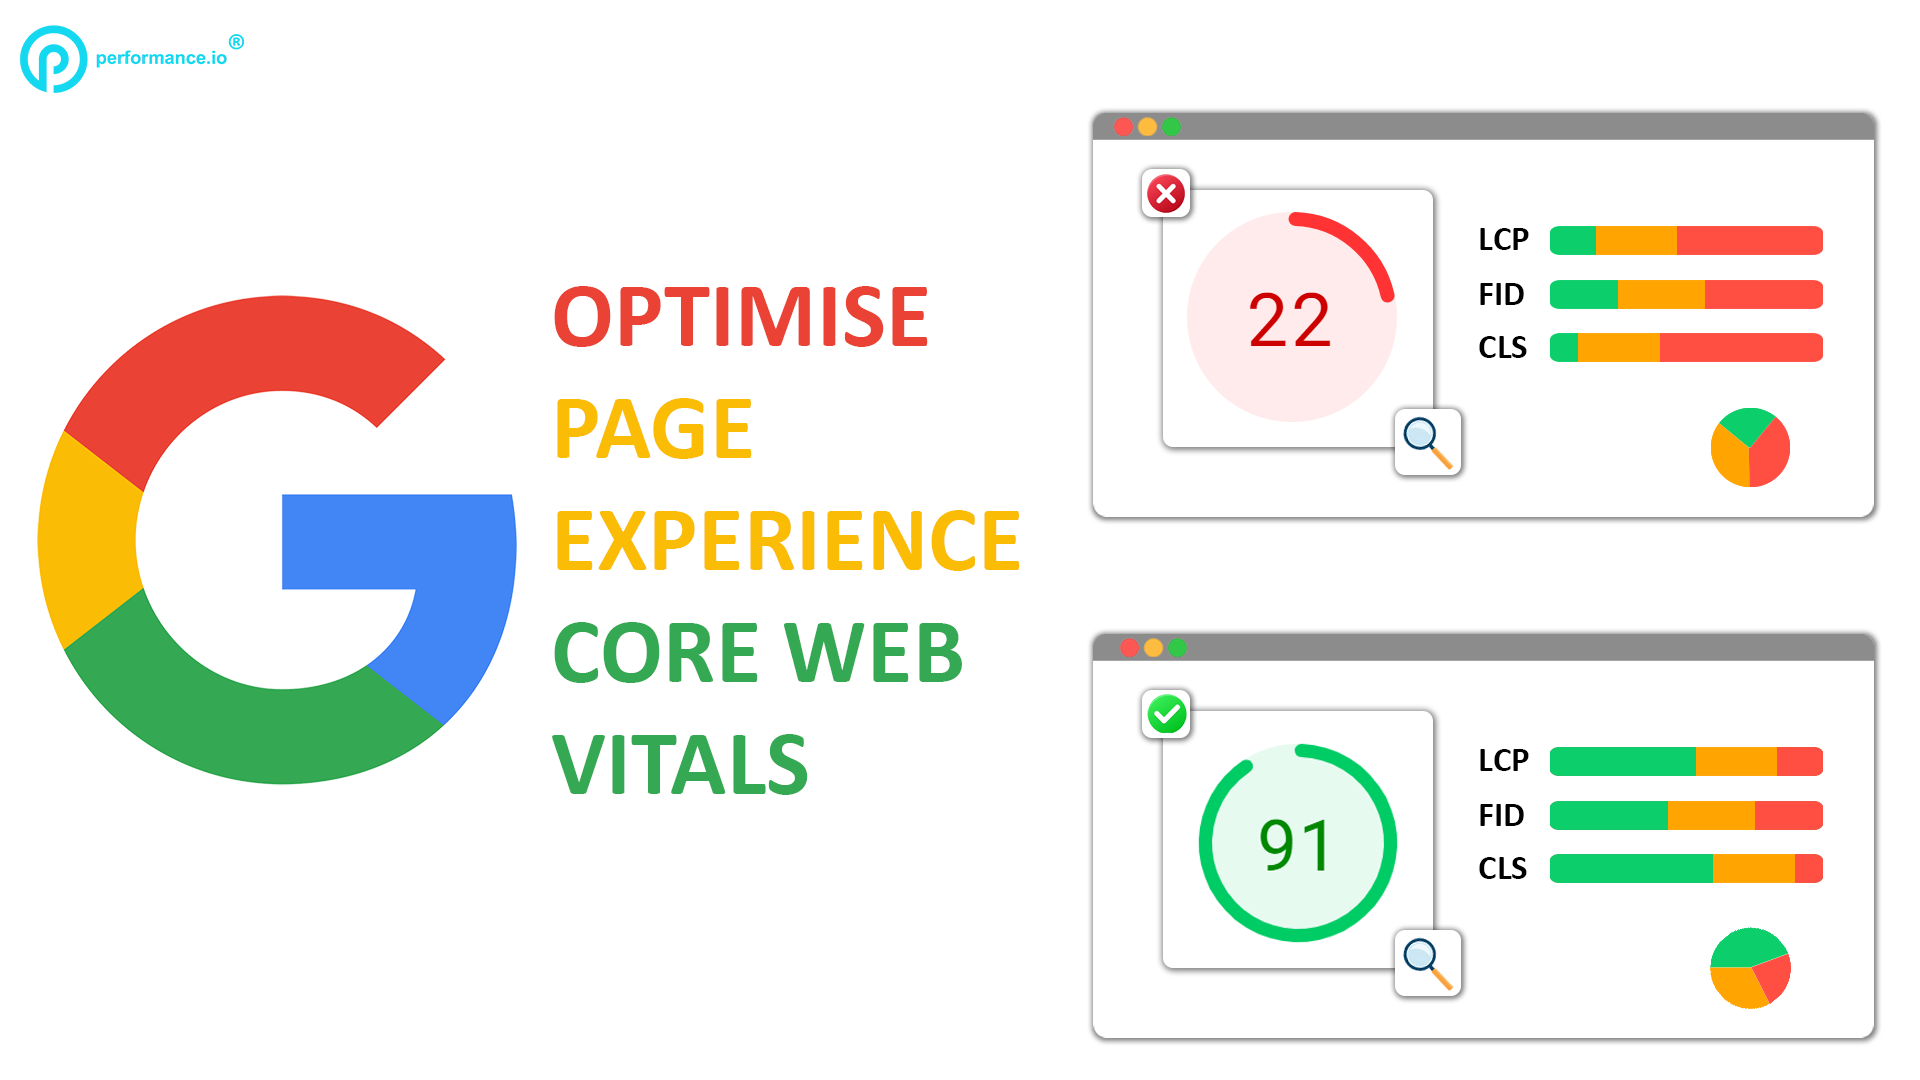 Optimise page experience core web vitals